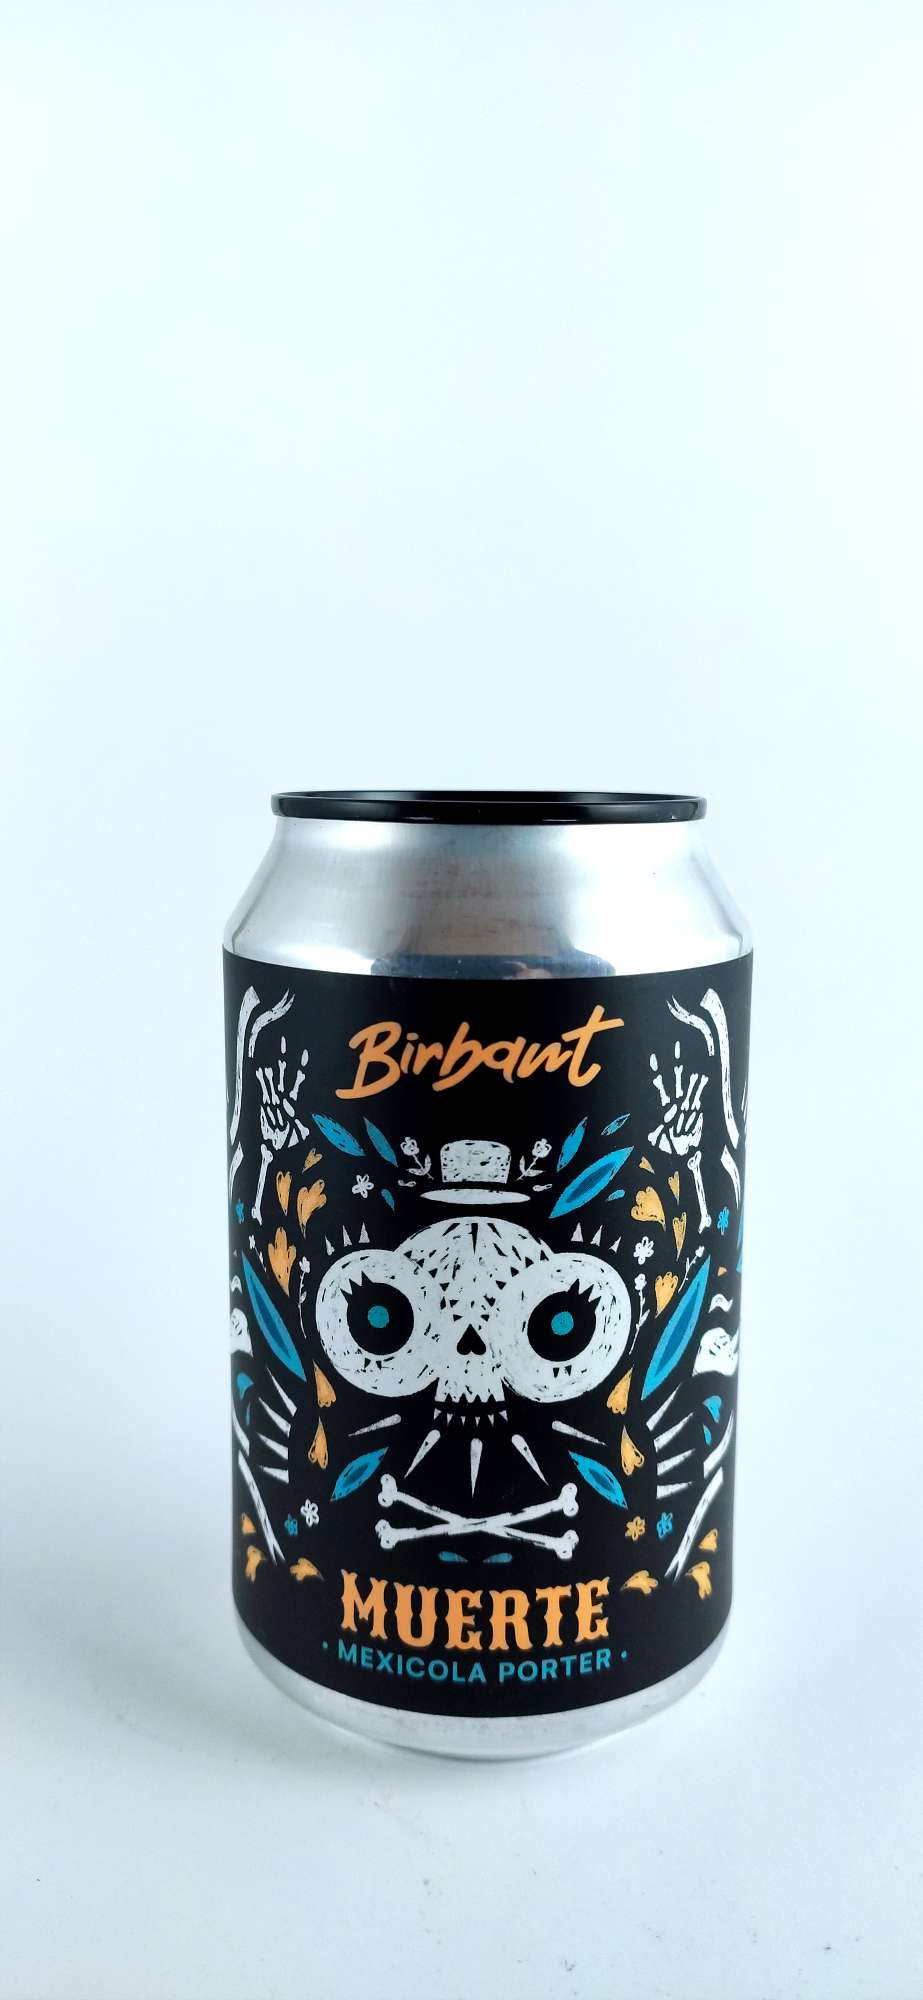 Birbant Muerte Imperial Porter with Coffe Agave